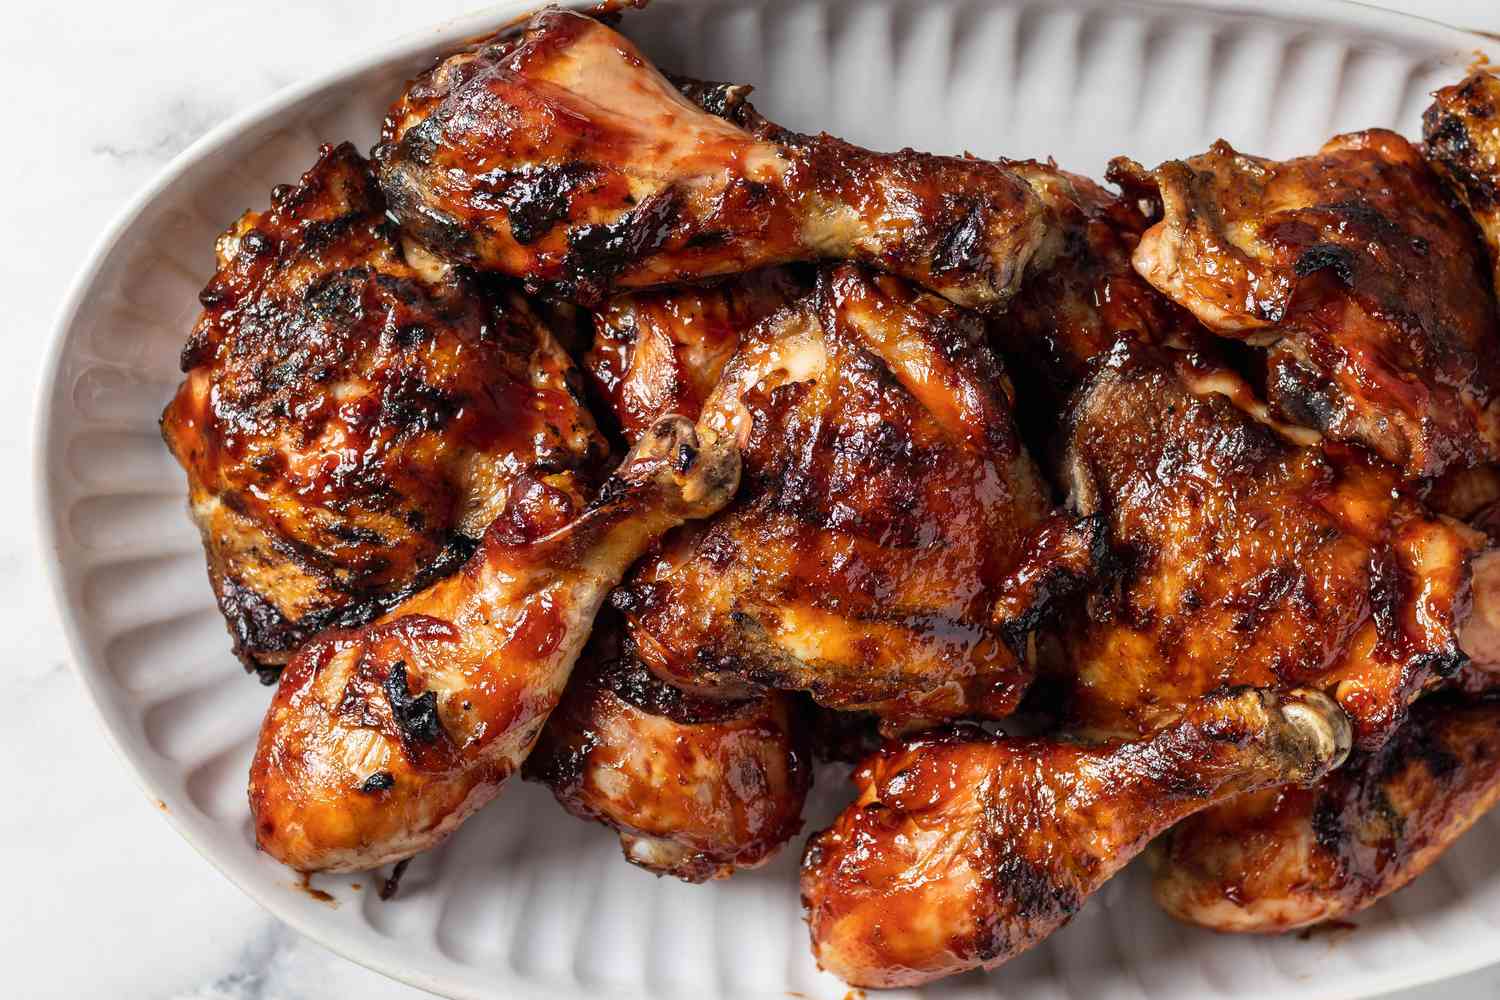 Simply-Recipes-Grilled-BBQ-Chicken-LEAD-10-03fd9892eaae4ce1a8a3f4c949657cfd.jpg